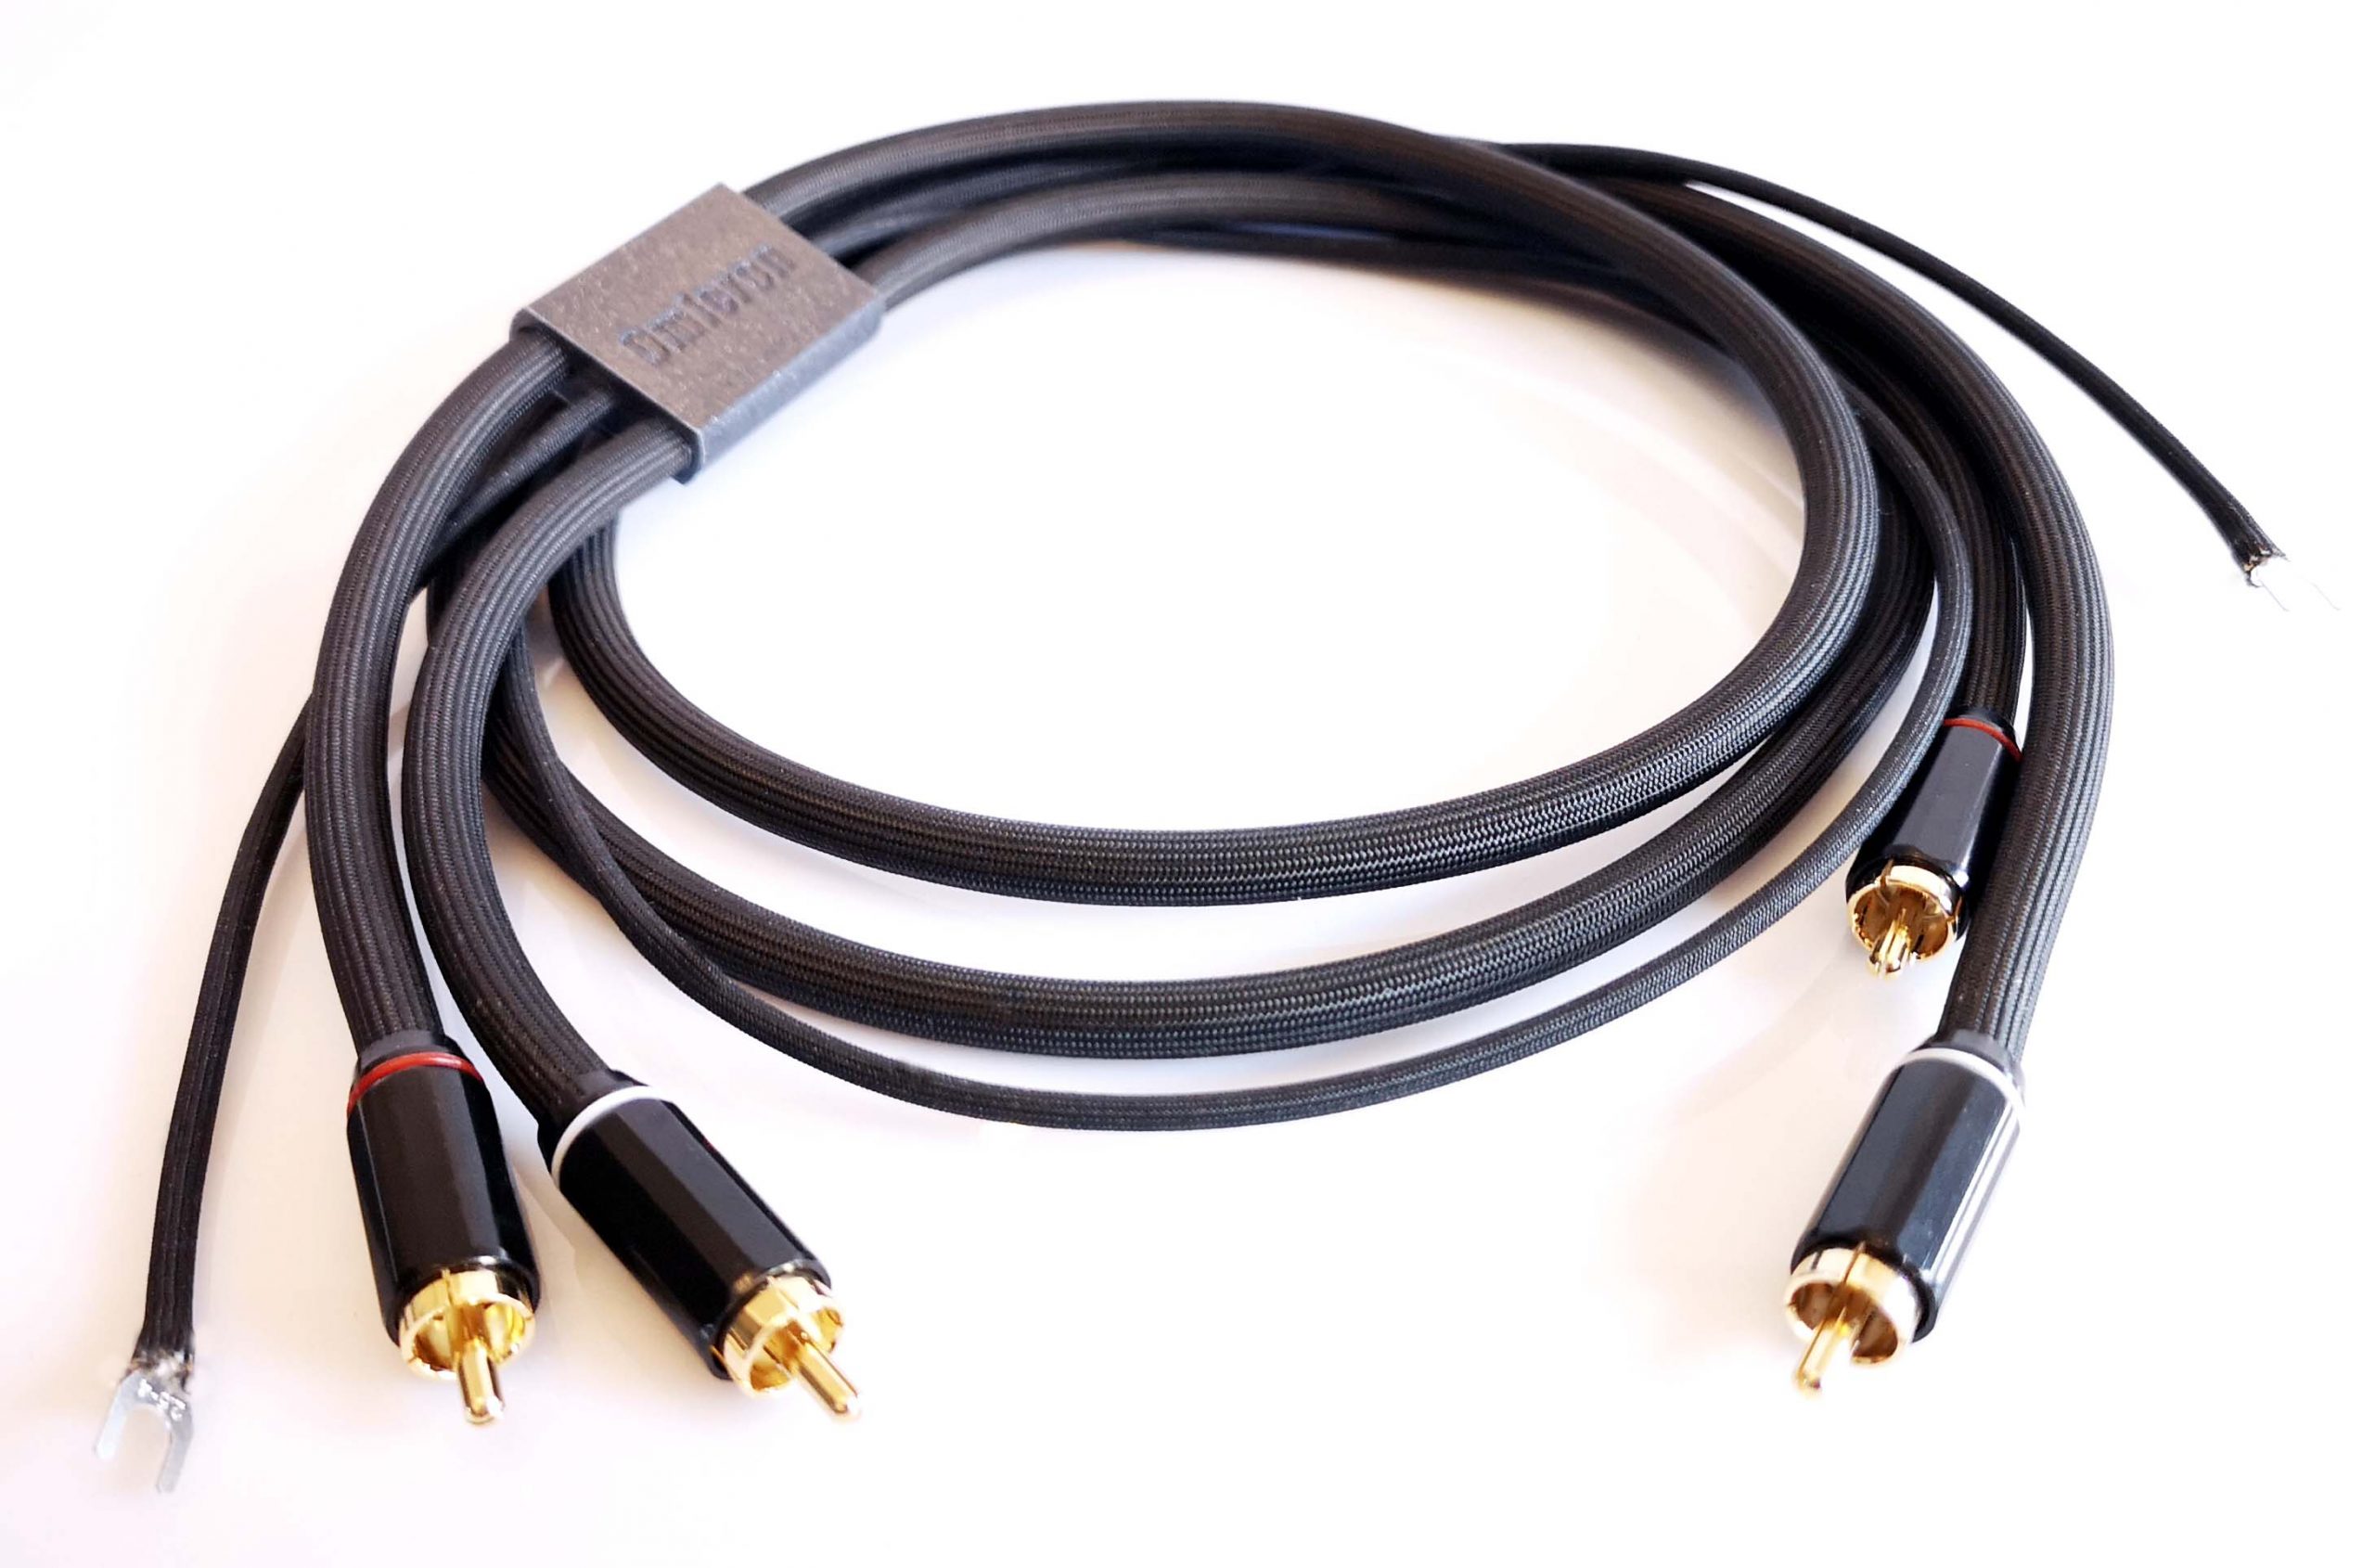 Omicron Phono RCA Odeion Cables